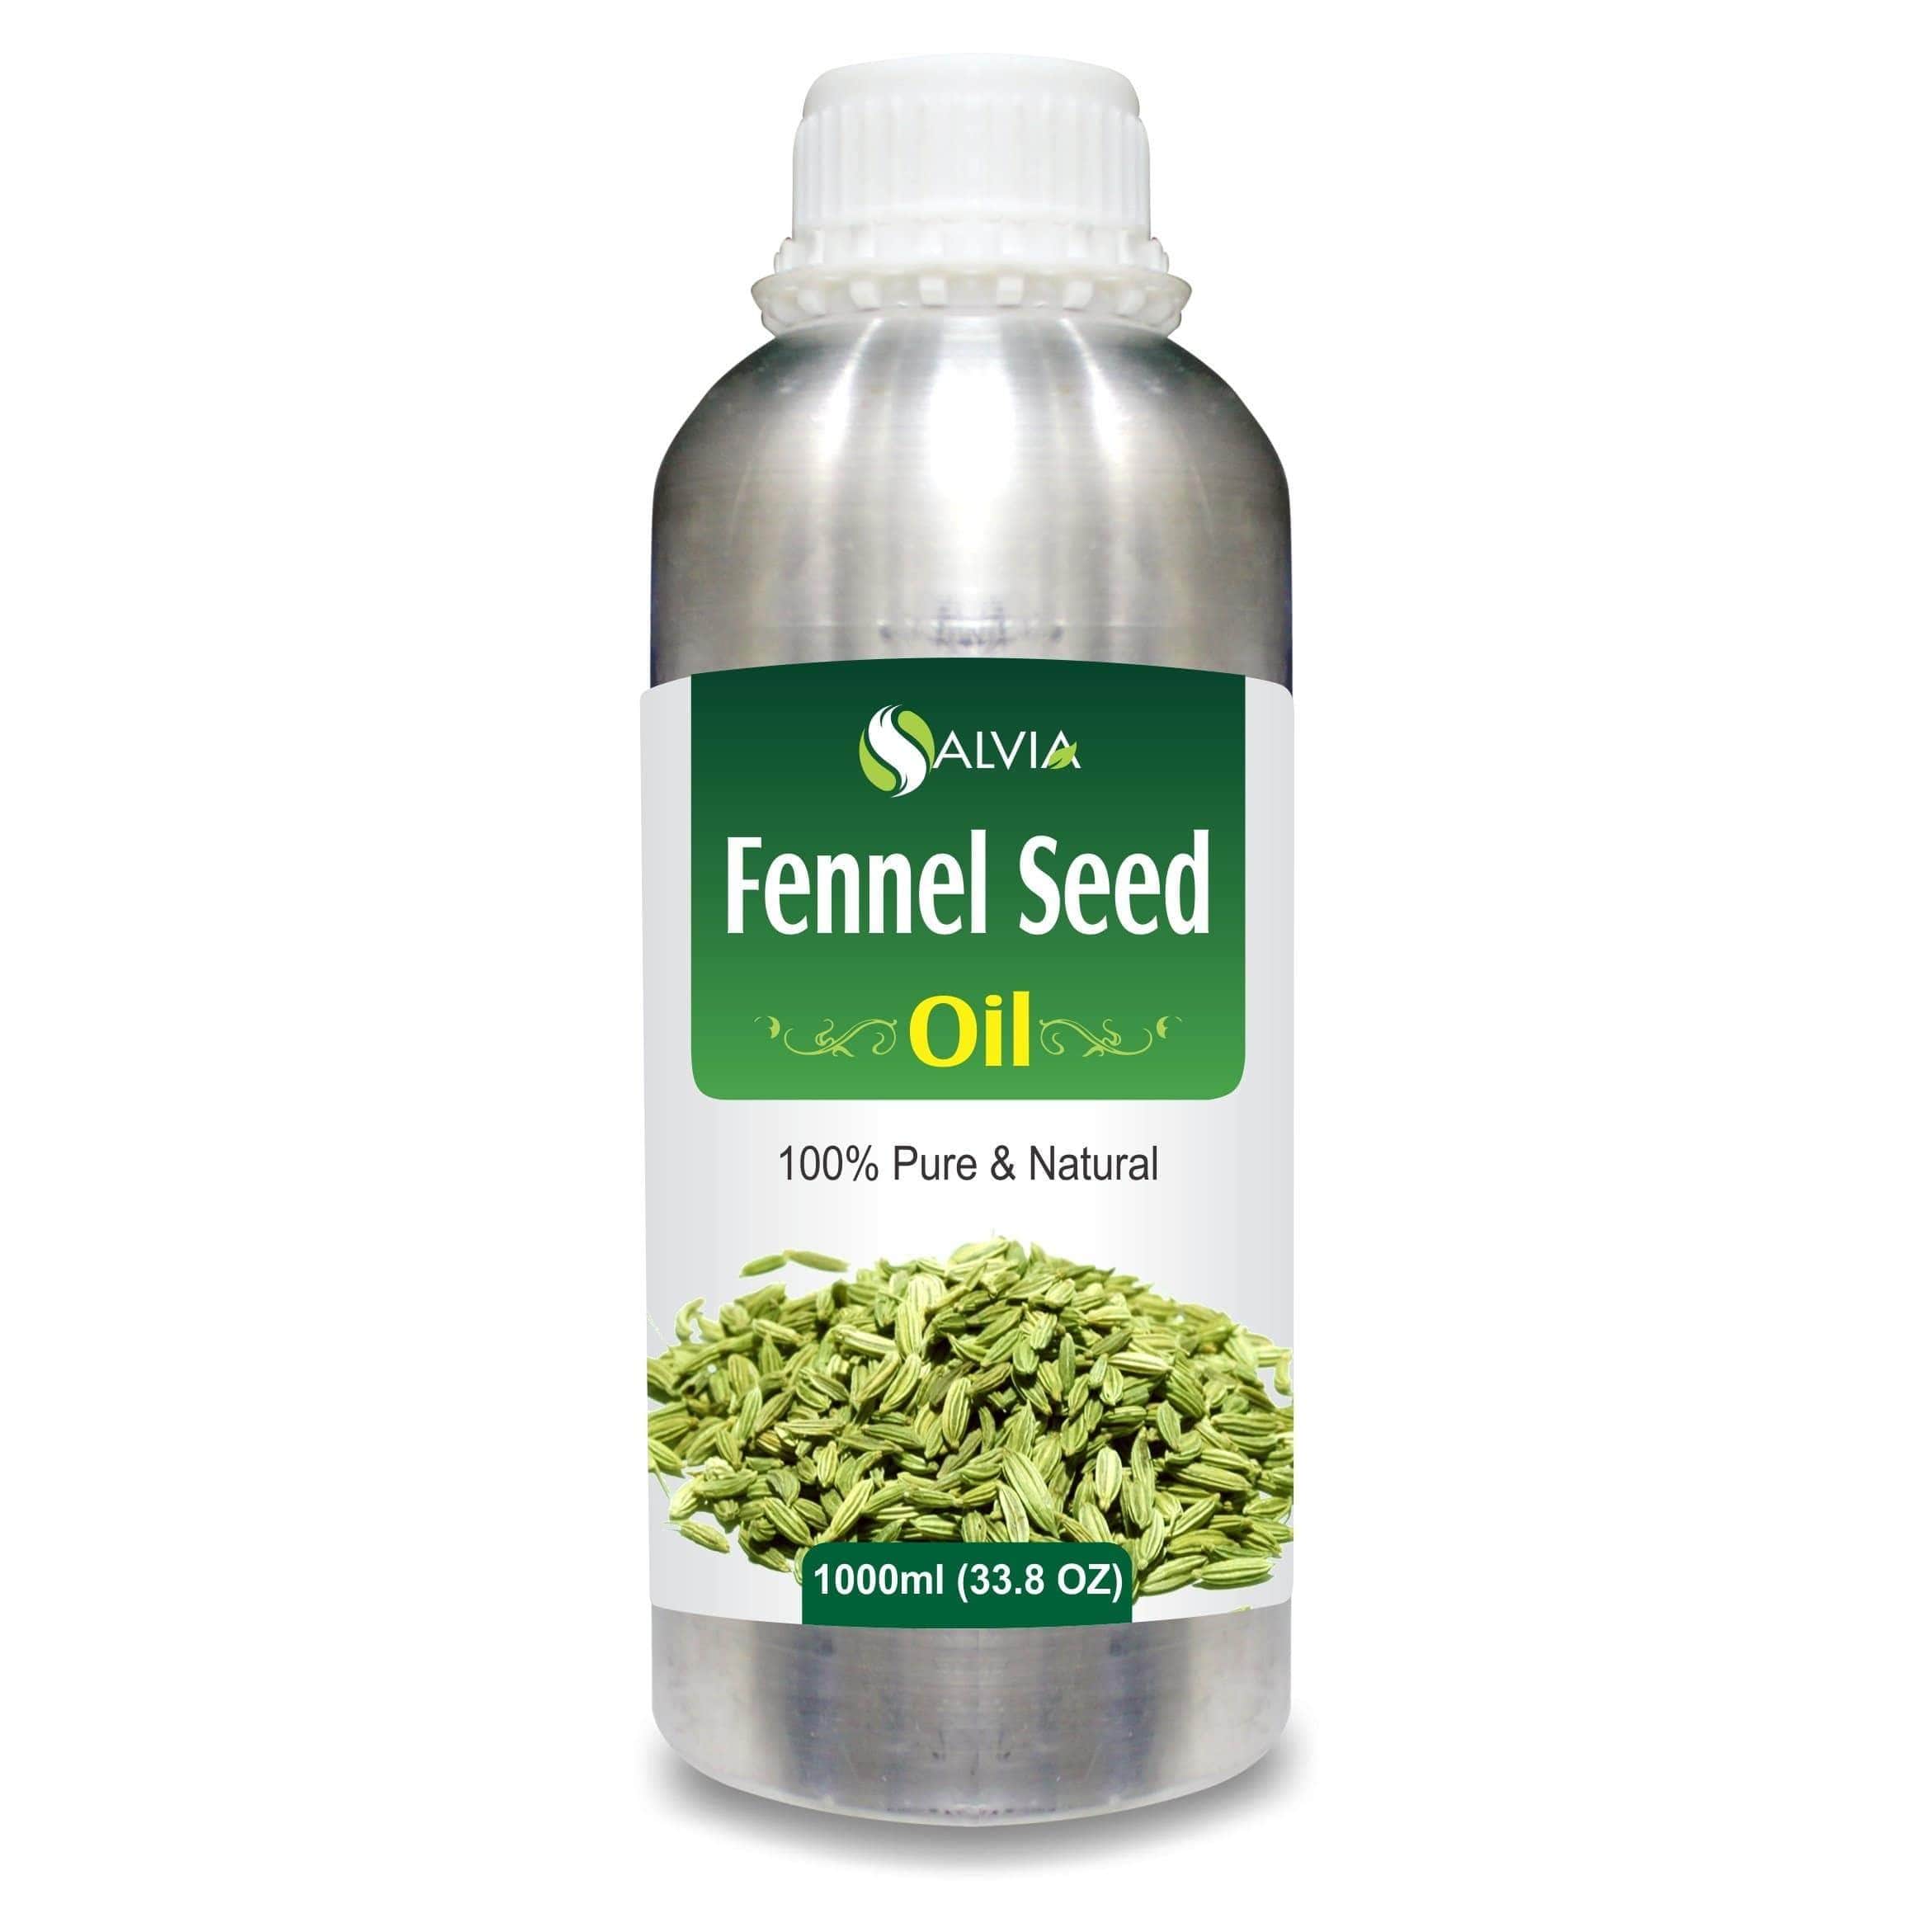 Fennel Seed oil benefits 